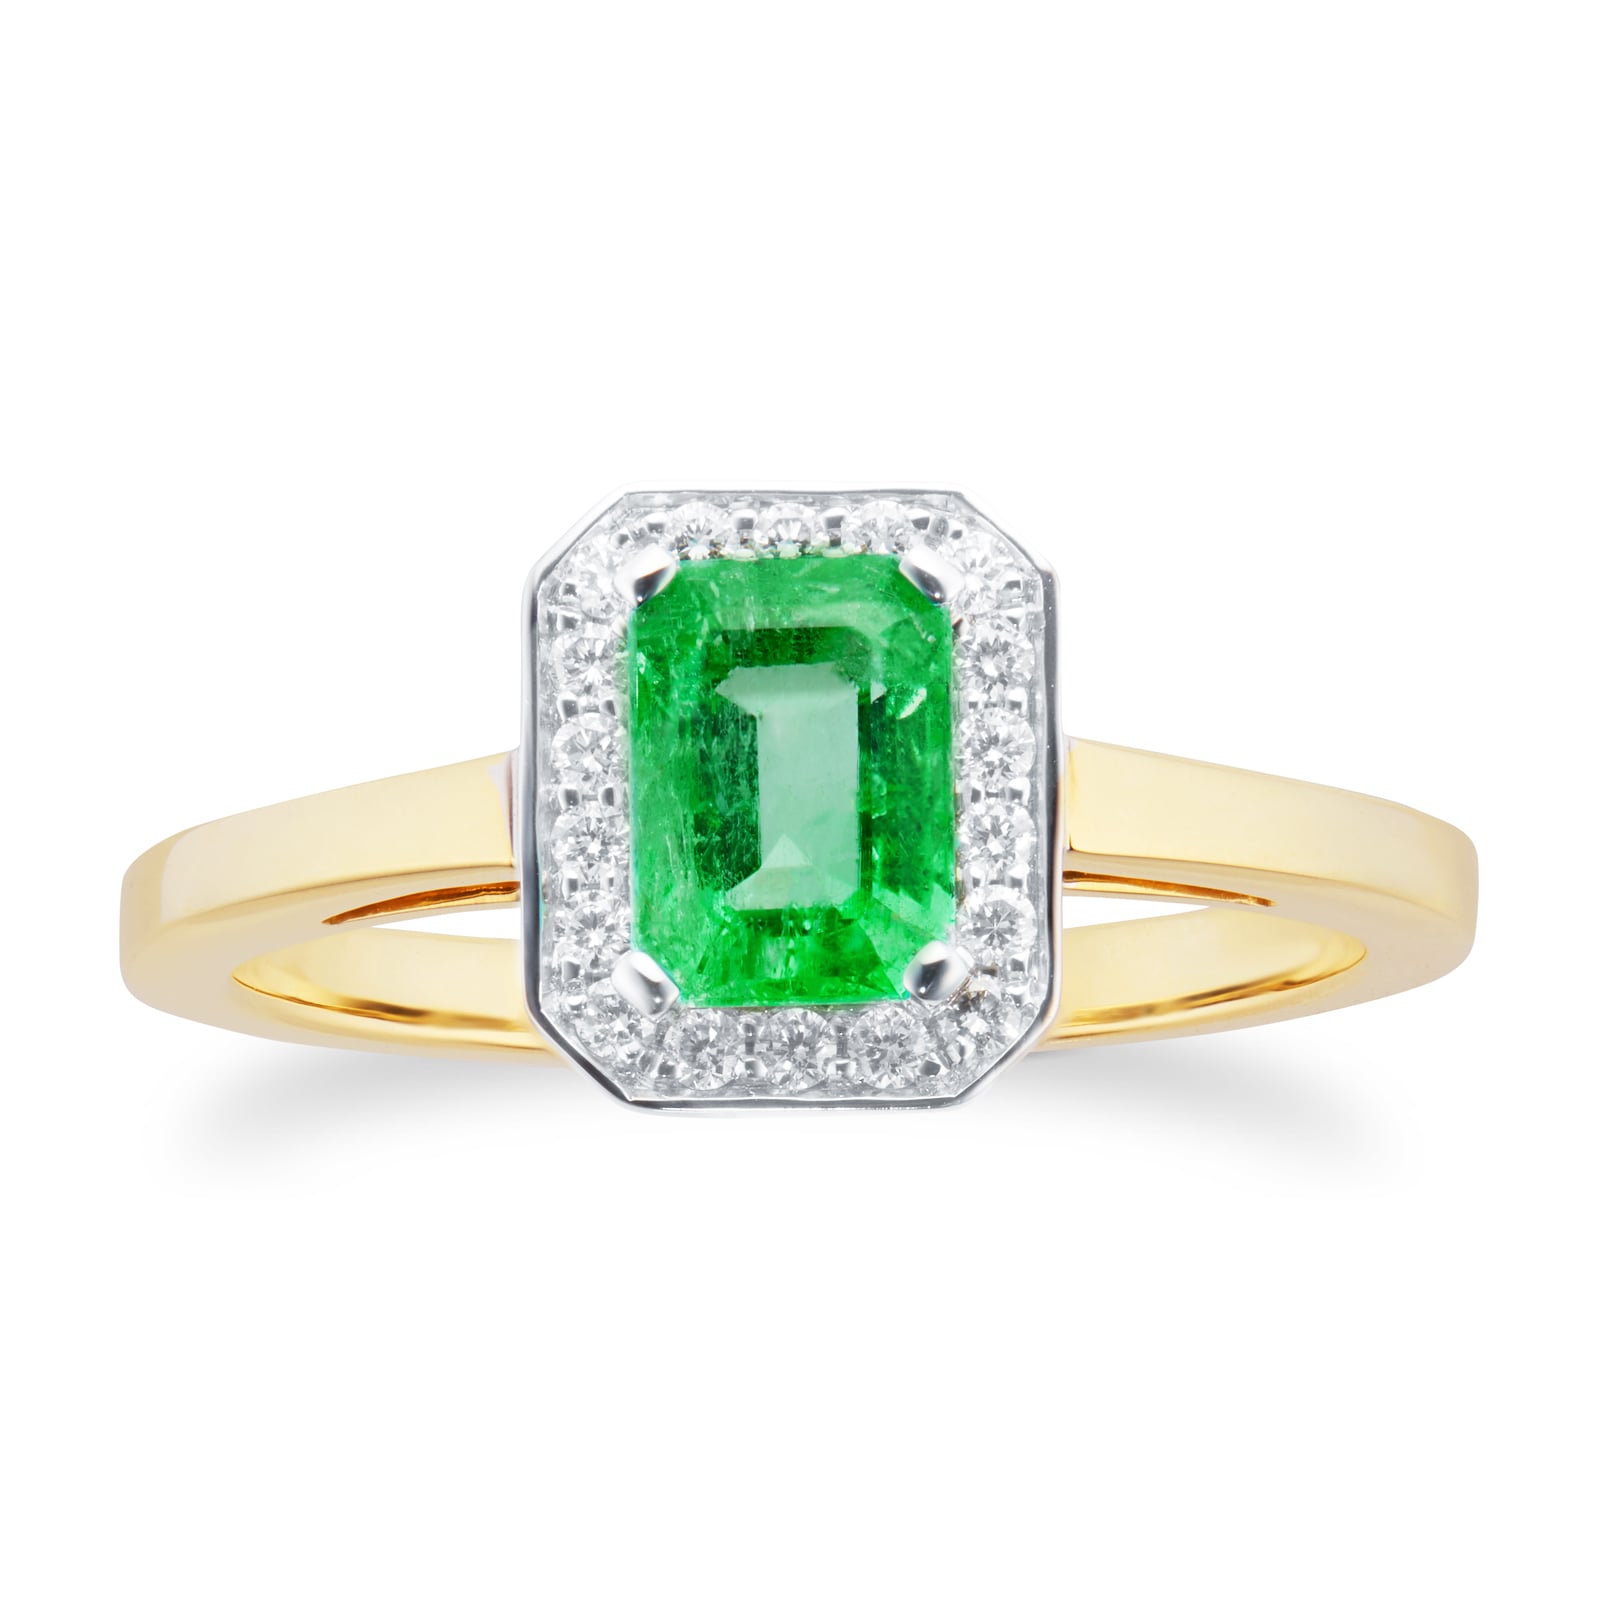 18ct Yellow and White Gold Emerald and Diamond Halo Ring - Ring Size L.5